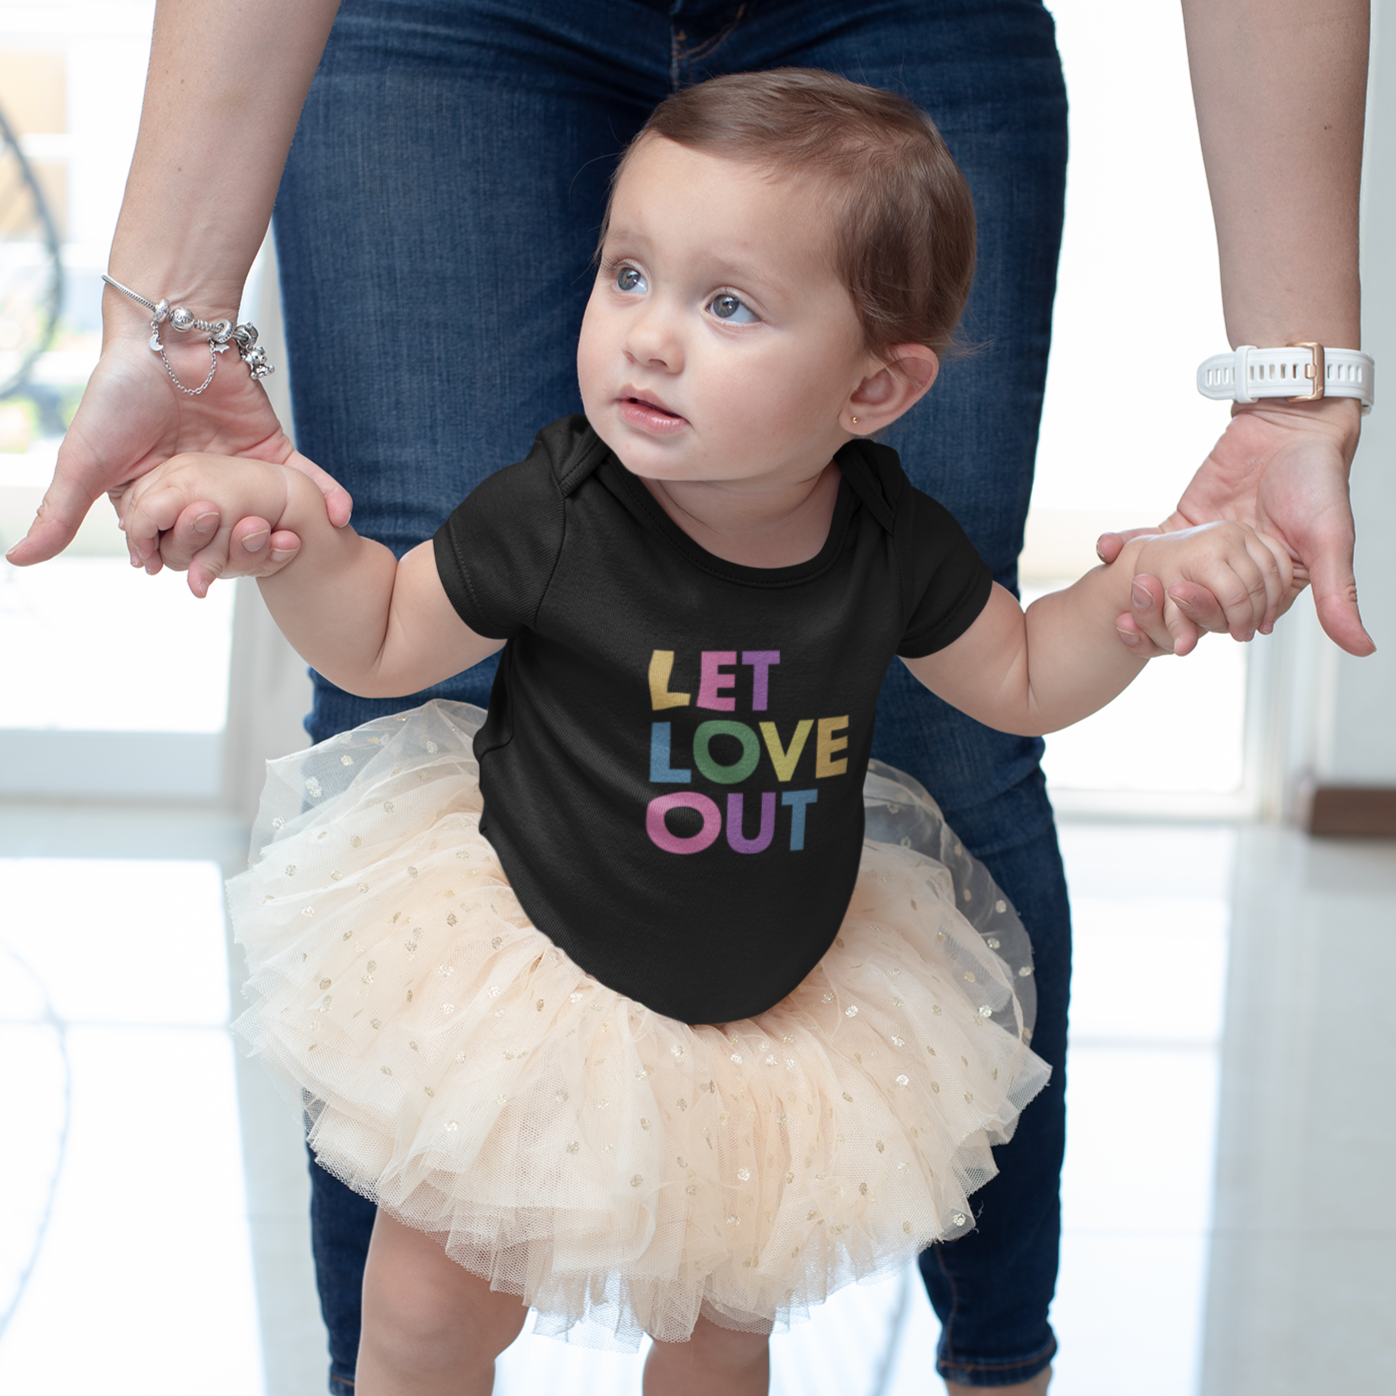 Toddler wearing Let Love Out tee